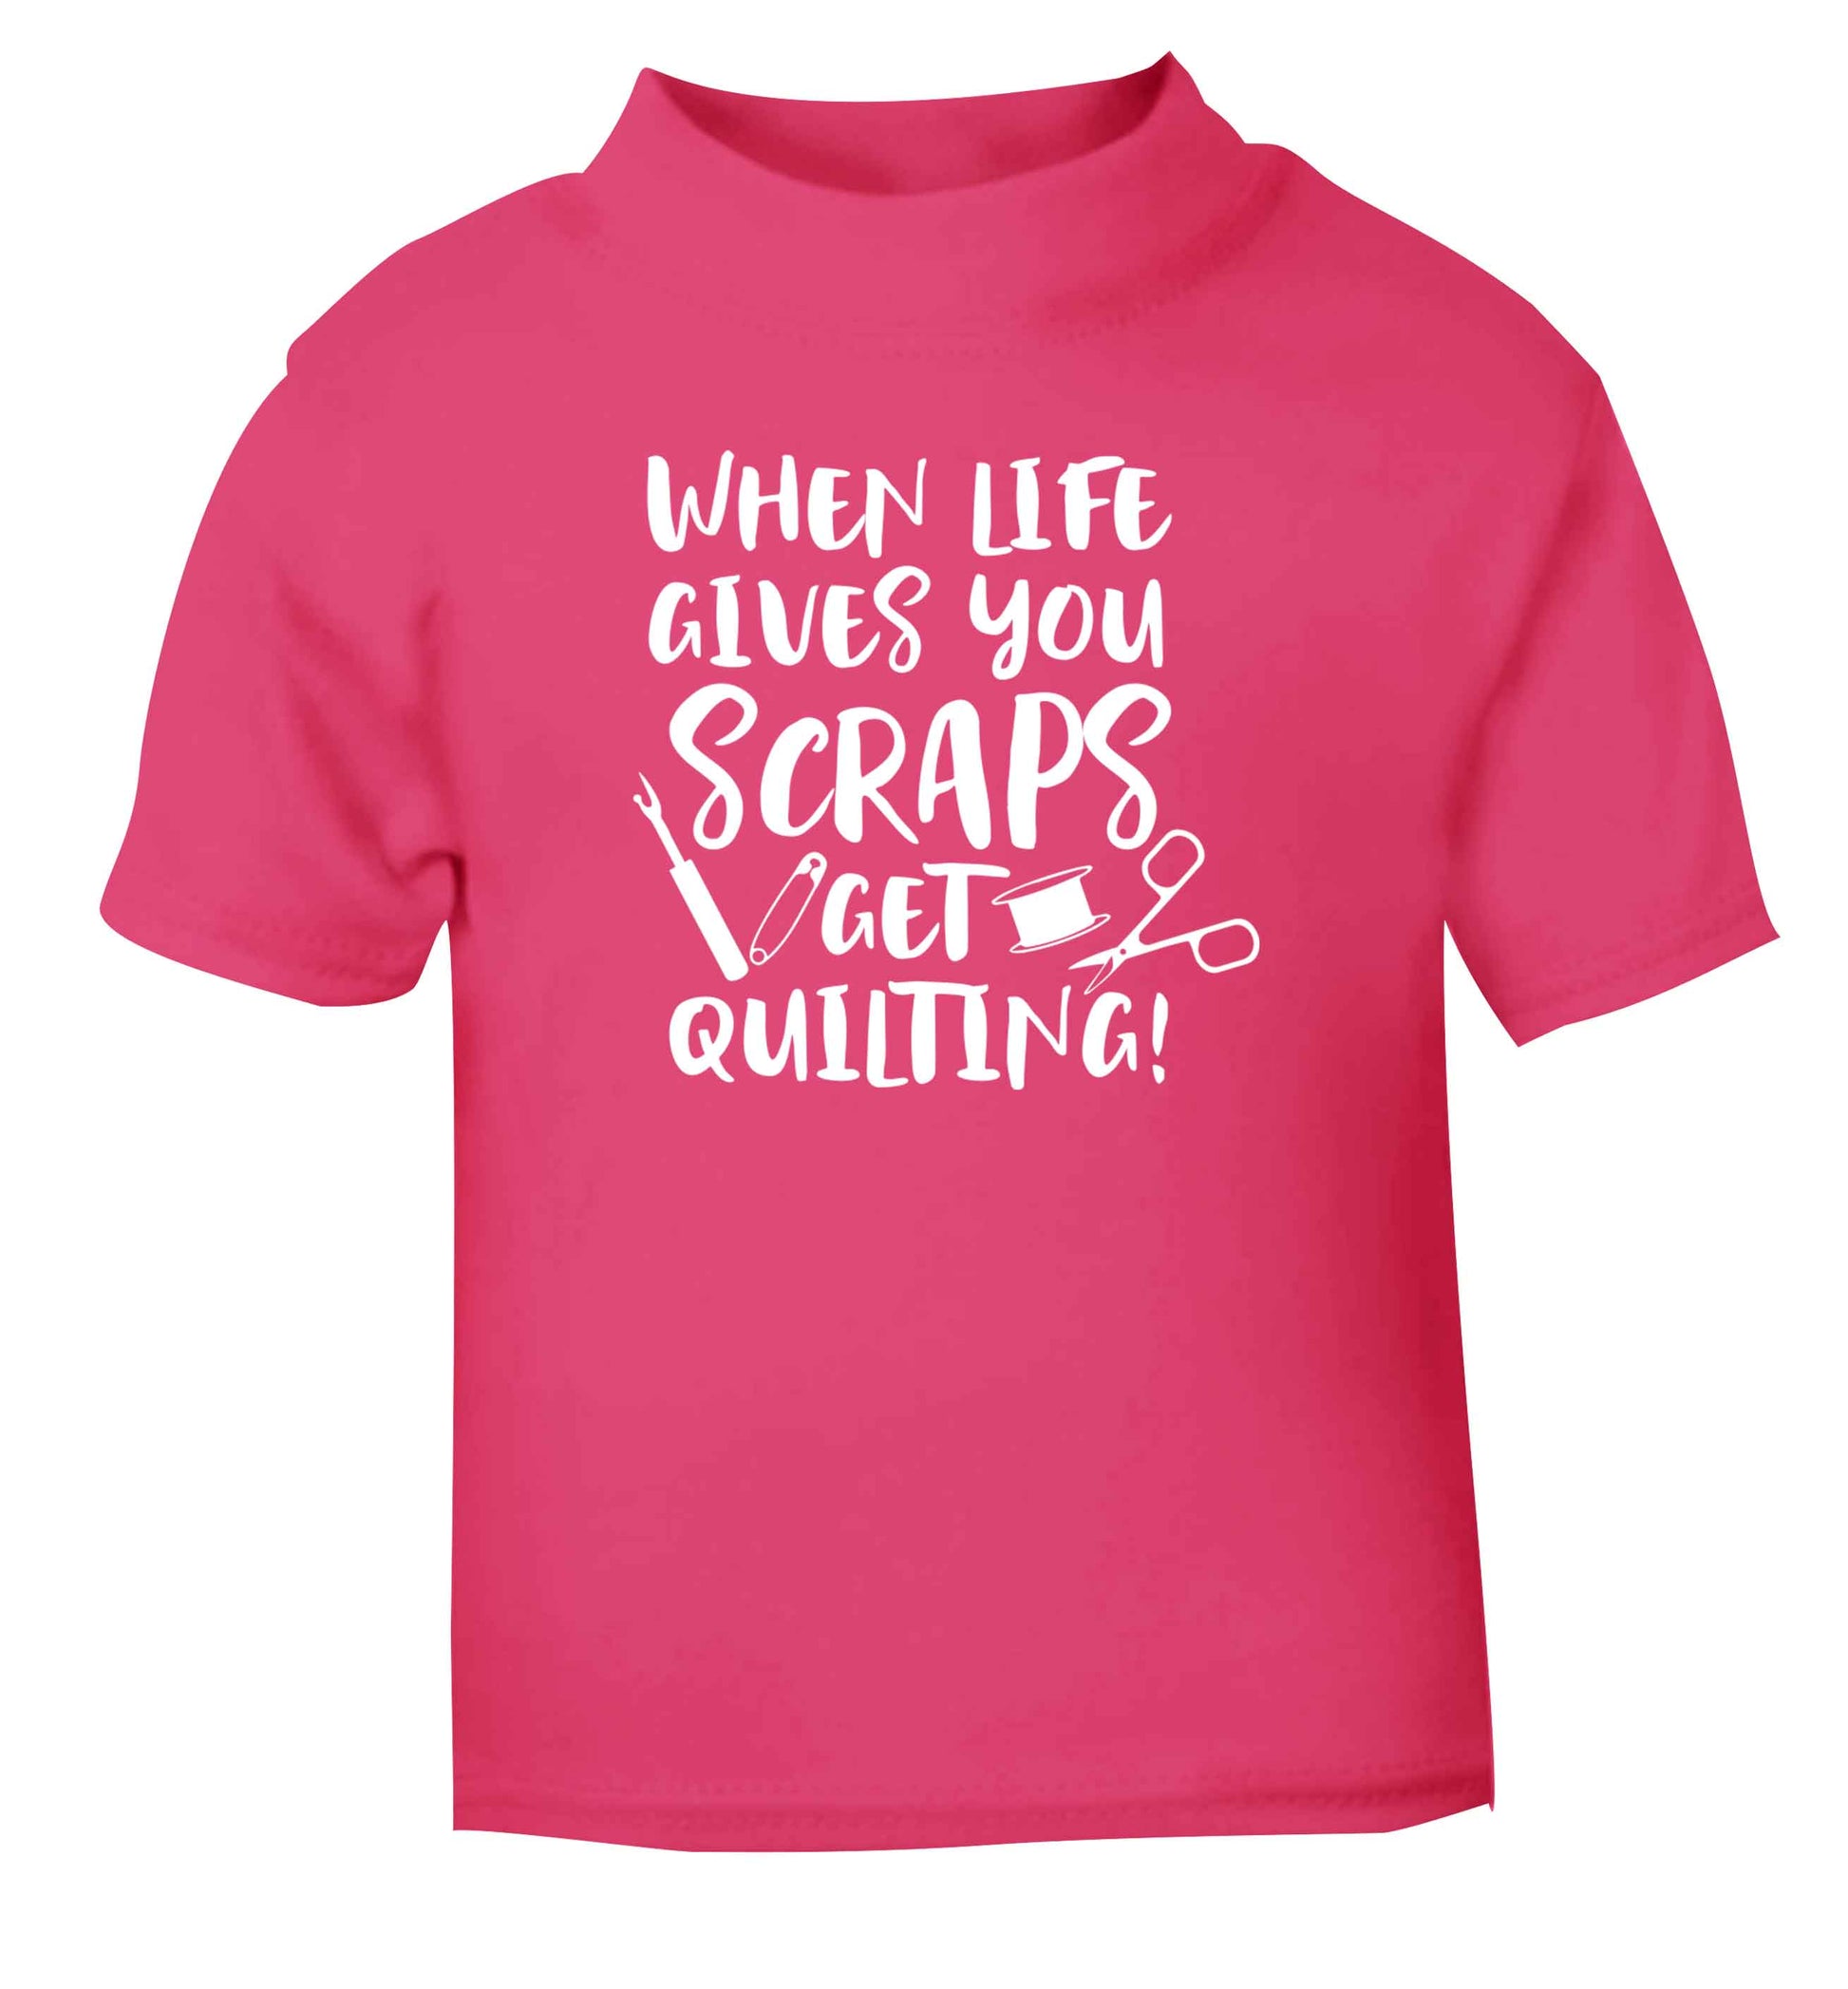 When life gives you scraps get quilting! pink Baby Toddler Tshirt 2 Years